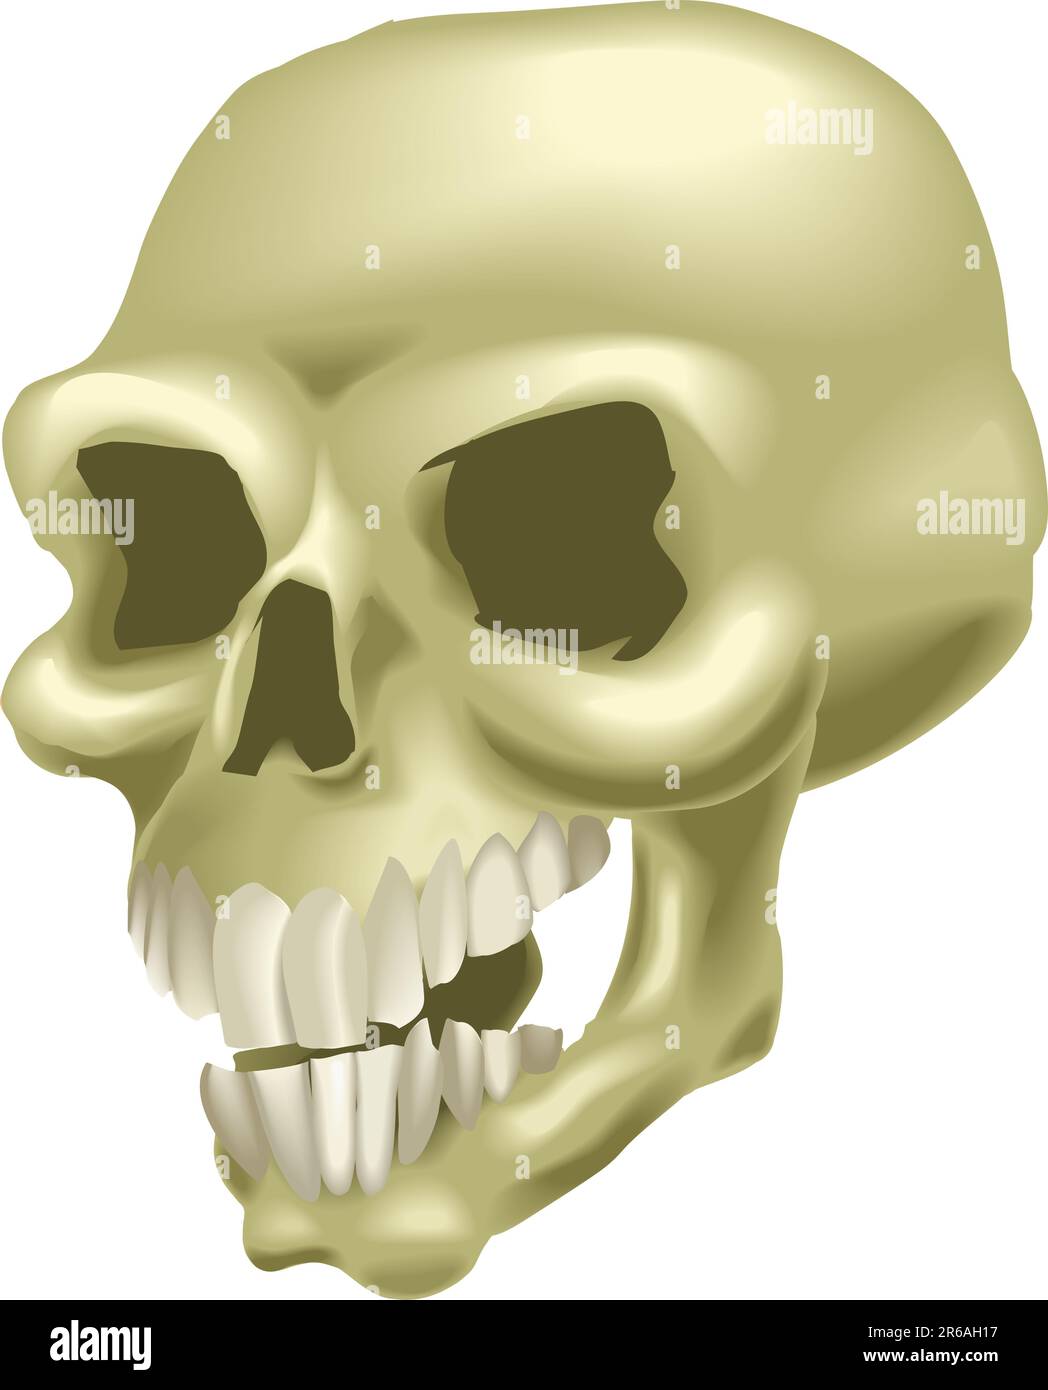 A human skull. No meshes used. Stock Vector